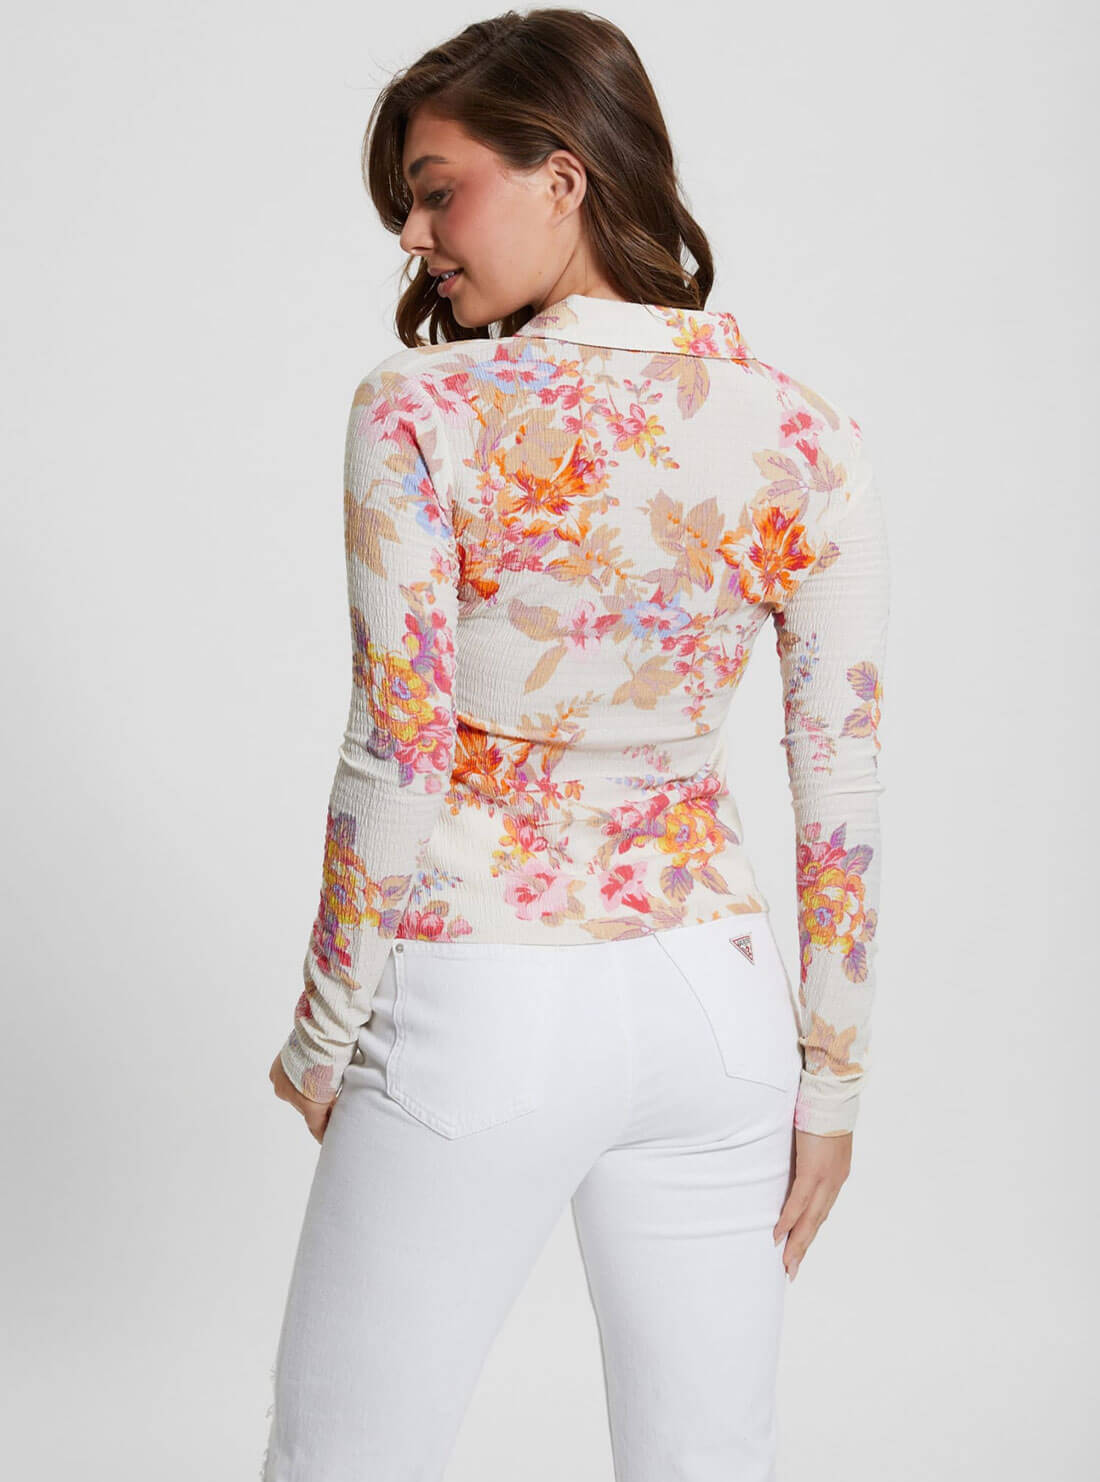 White Floral Tessa Long Sleeve Top | GUESS Women's Apparel | back view